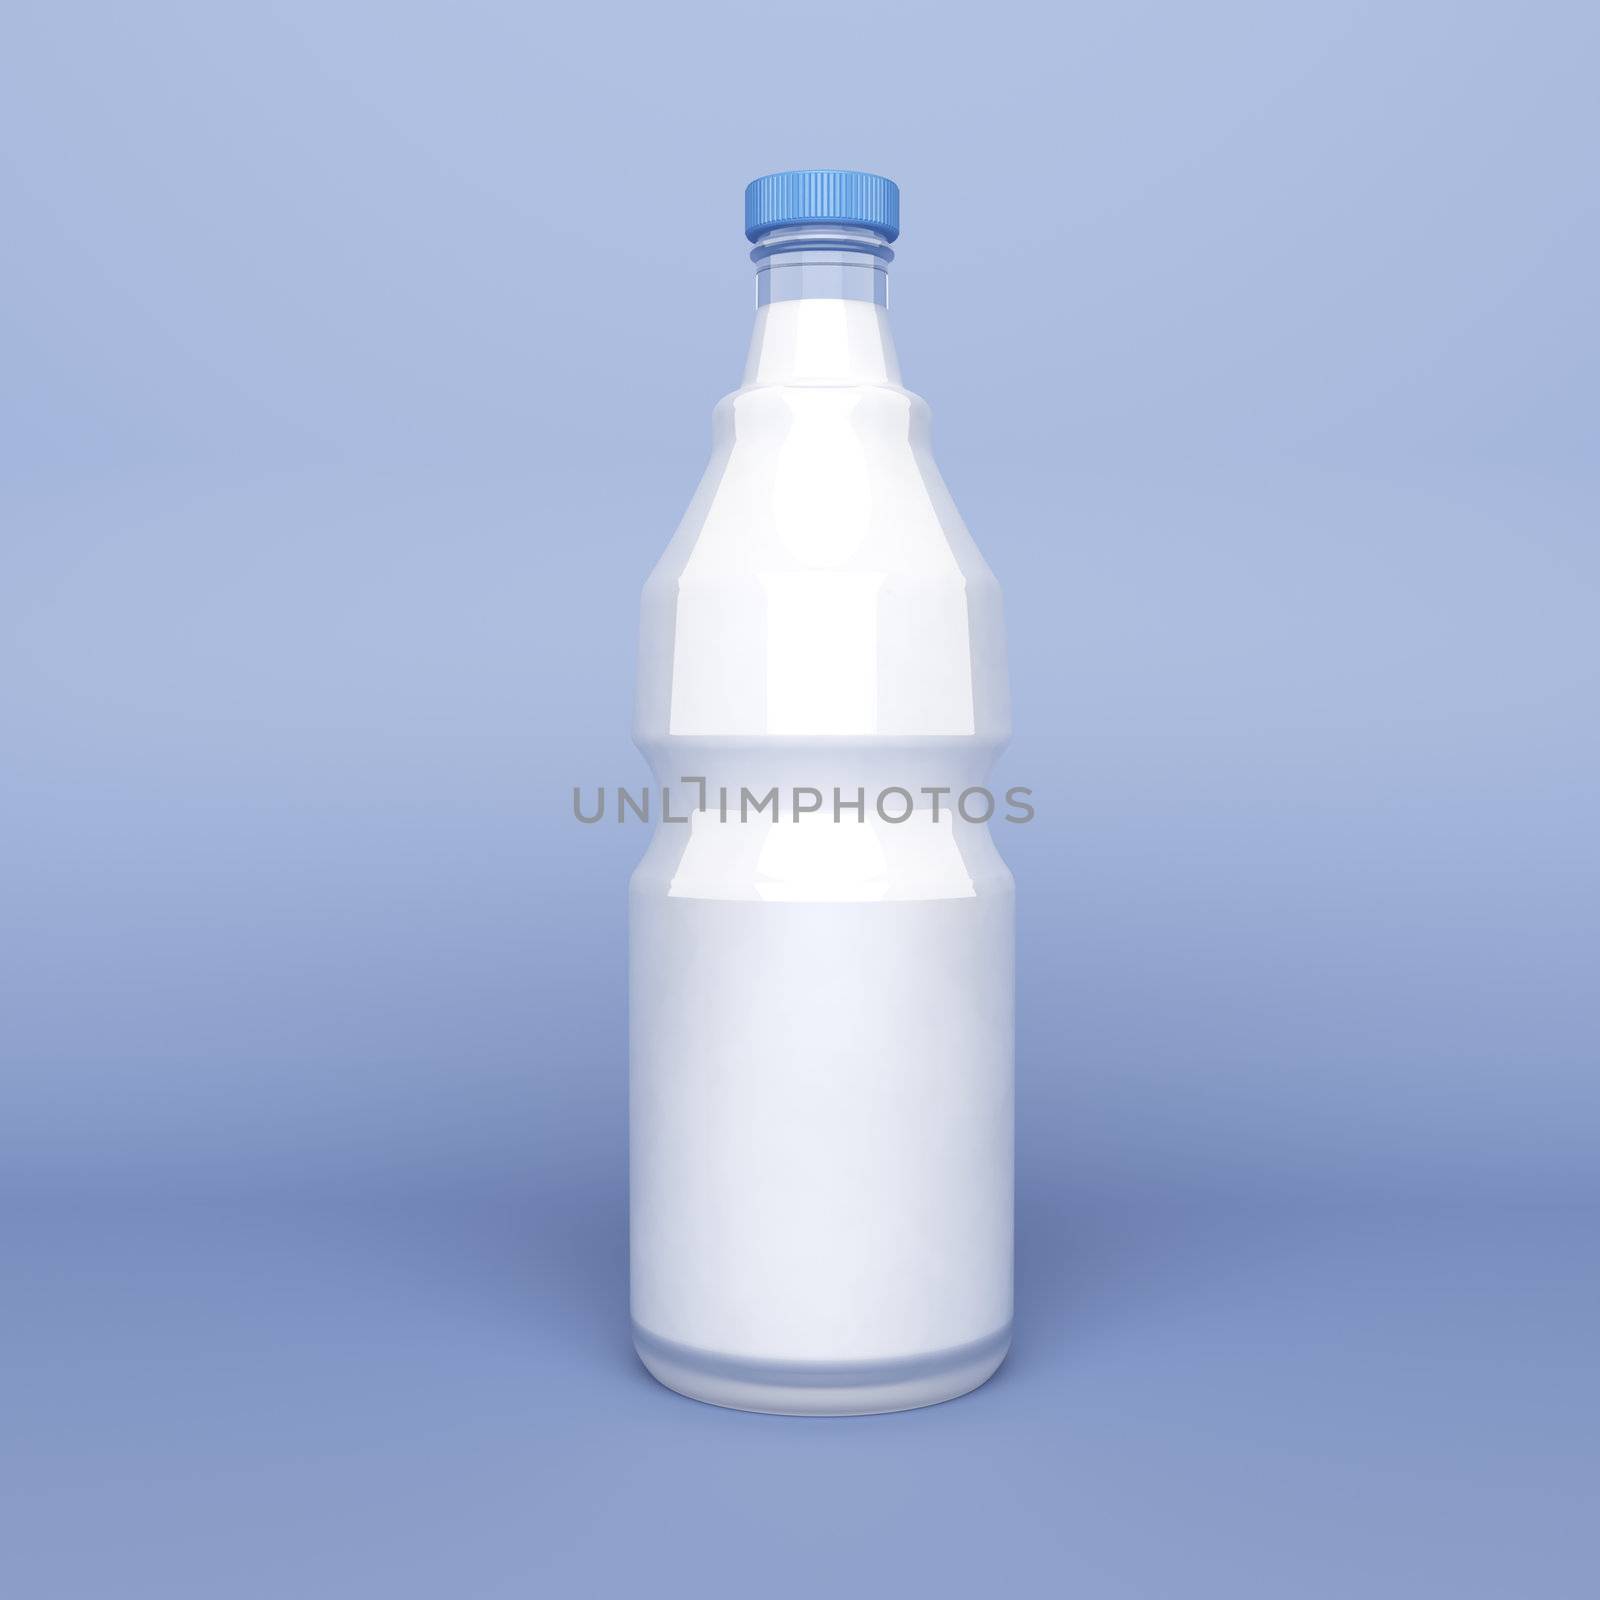 Milk in a glass bottle by magraphics